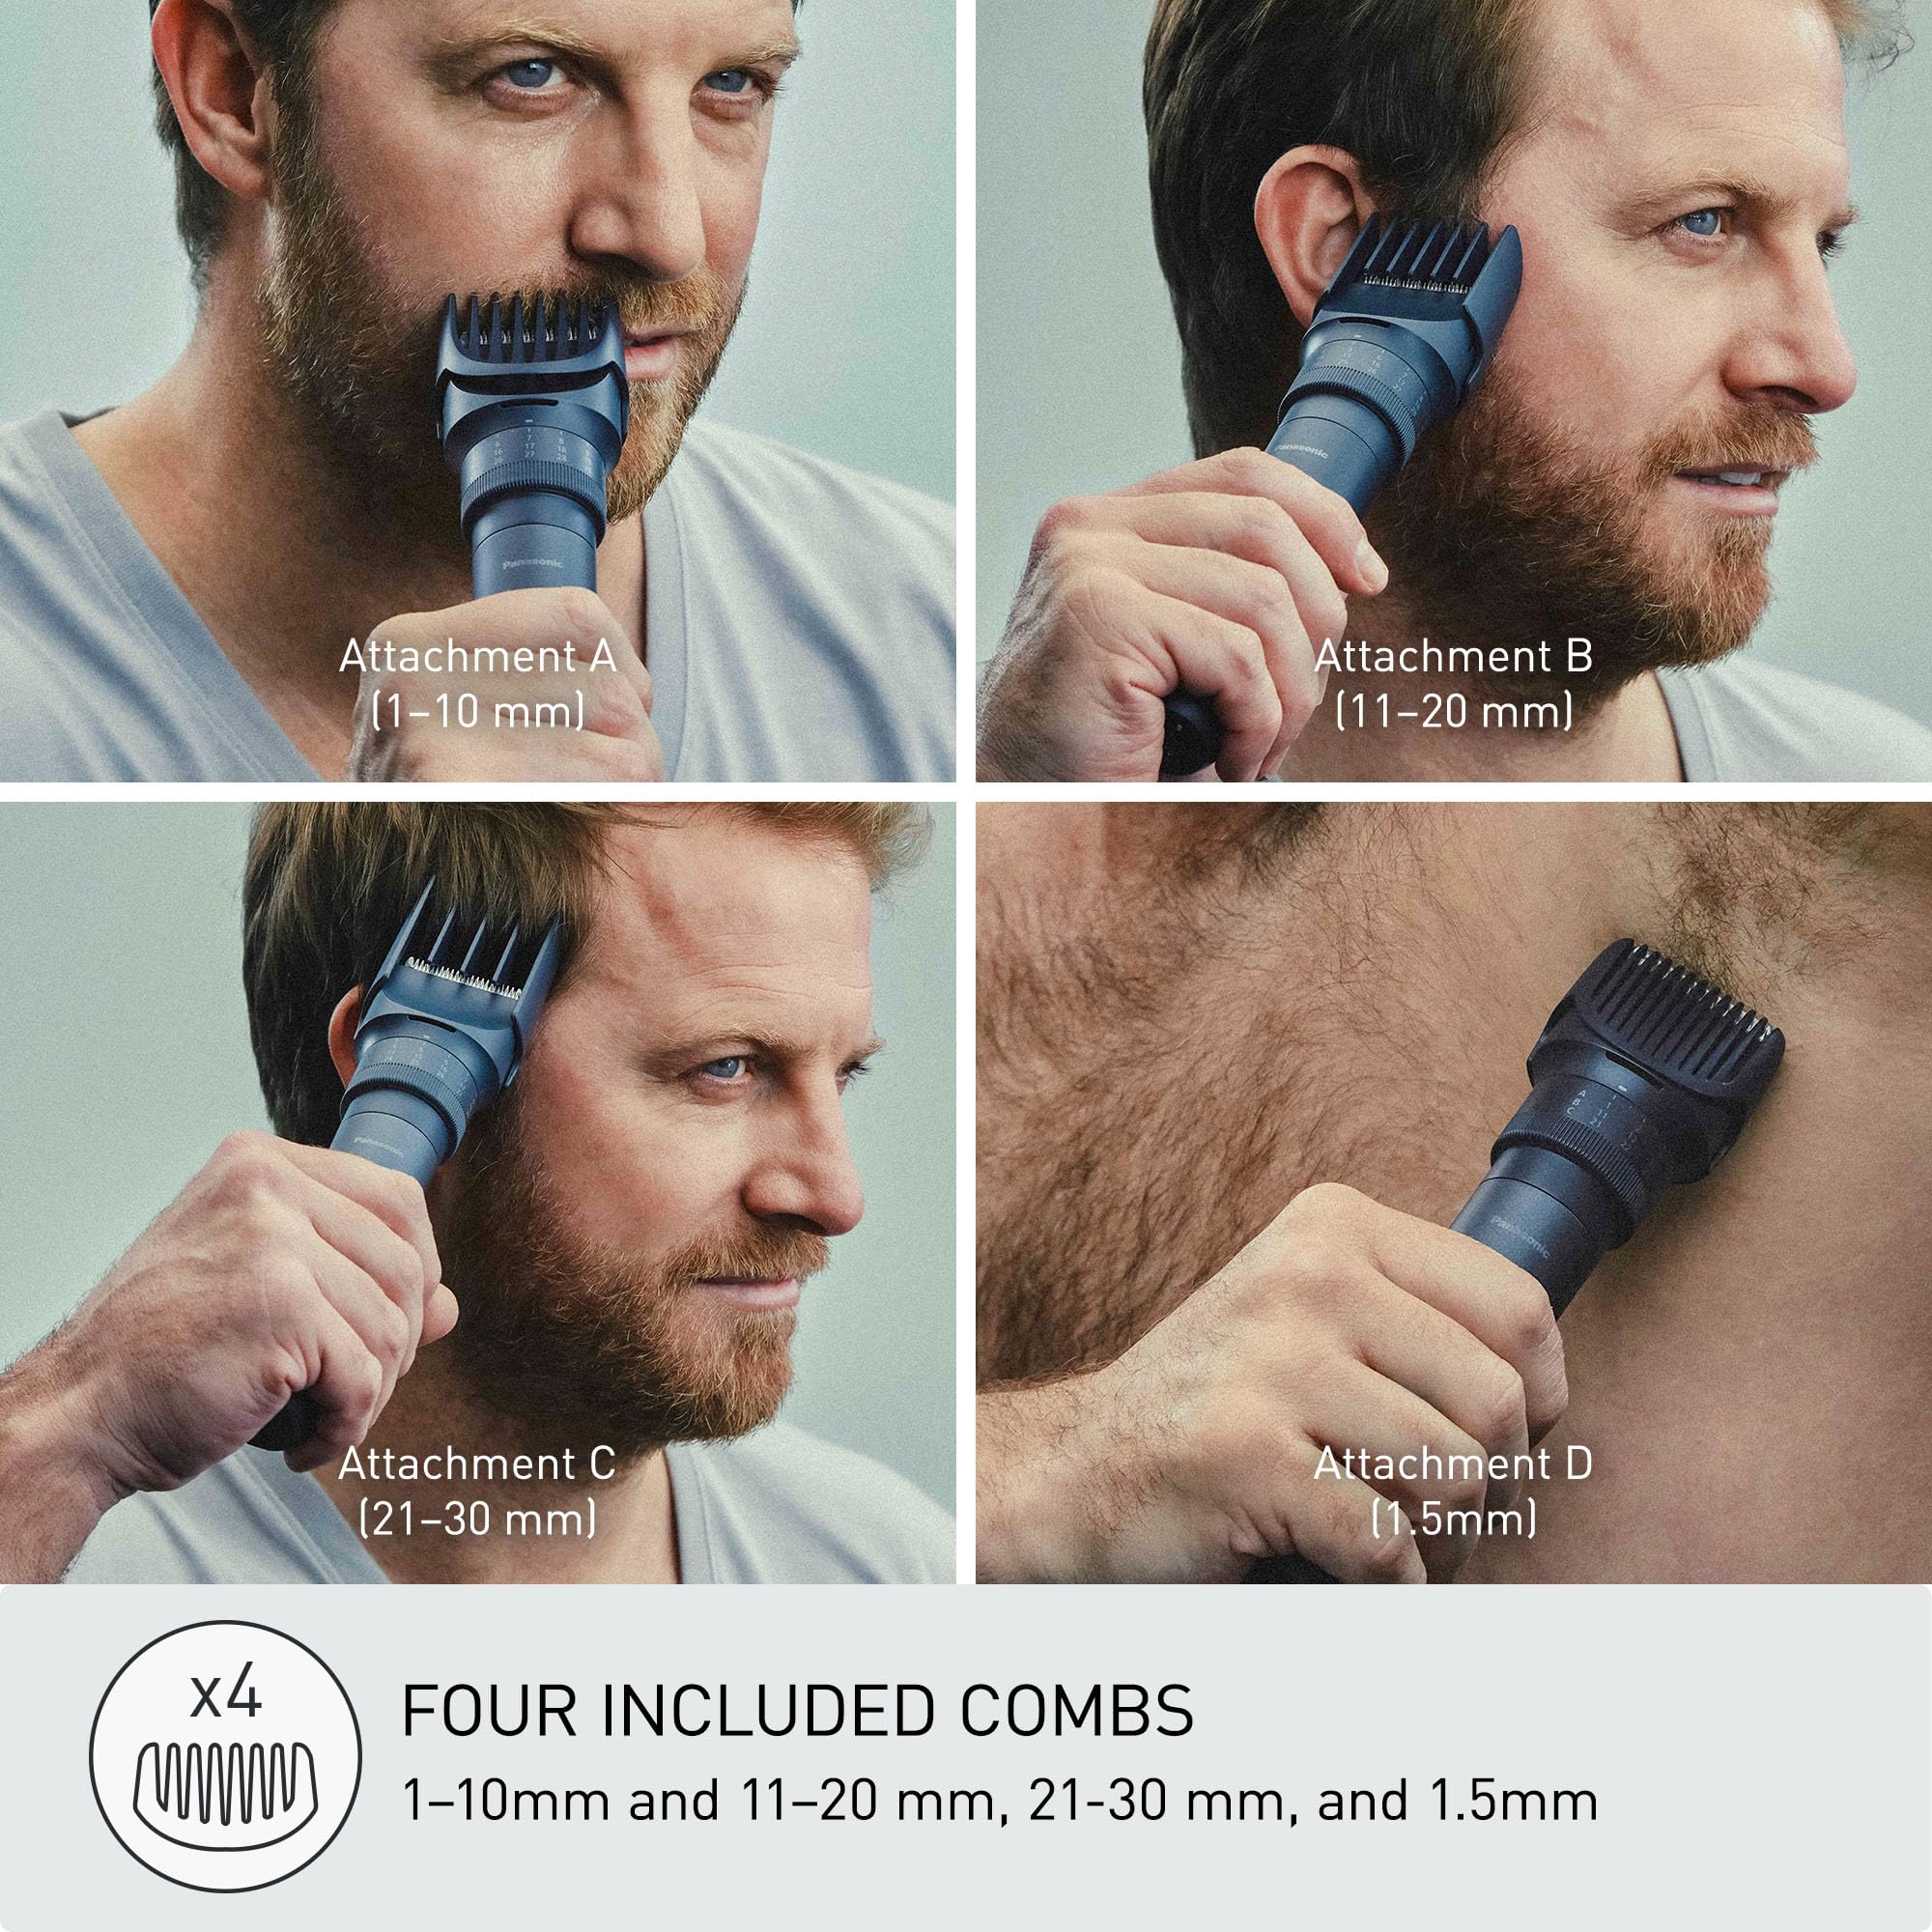 Panasonic MultiShape Electric Trimmer for Beard, Hair and Body, 58 Adjustable Cutting Lengths and Advanced Blade System, Cordless Waterproof Wet/Dry Clipper for Men - ER-ACKN2-HB